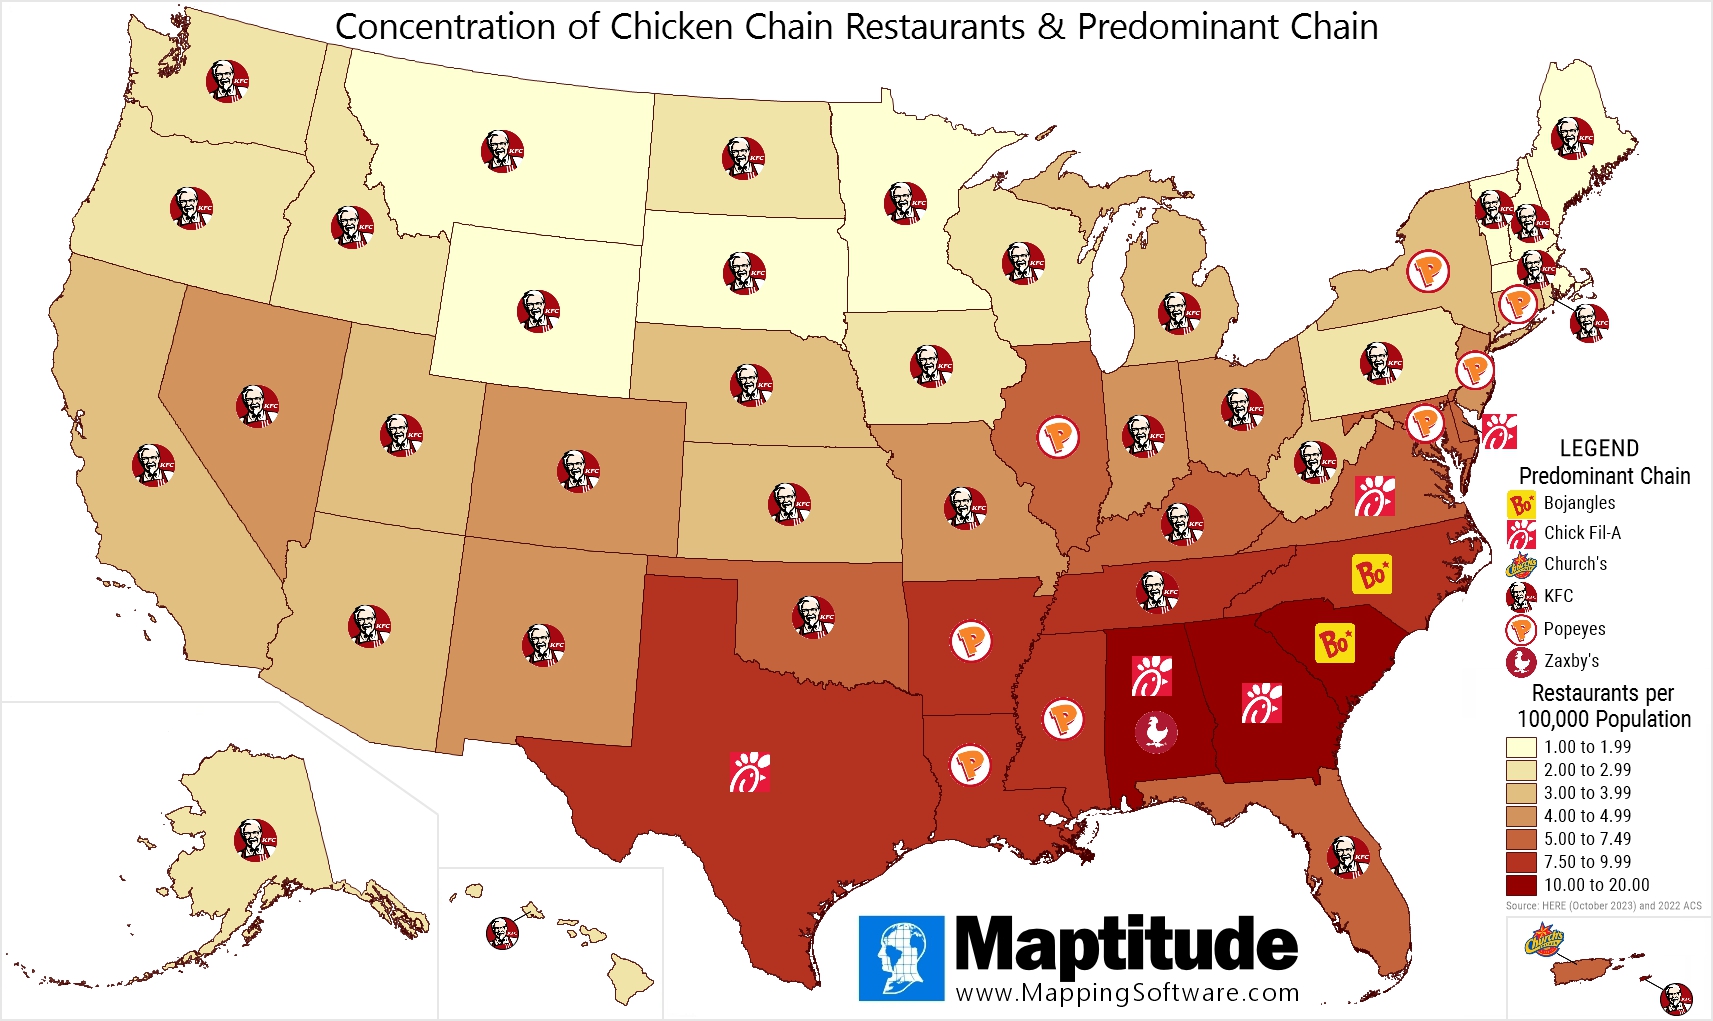 Maptitude mapping software infographic of fried chicken chain restaurants by state and most popular fried chicken chain in each state for July 6 National Fried Chicken Day